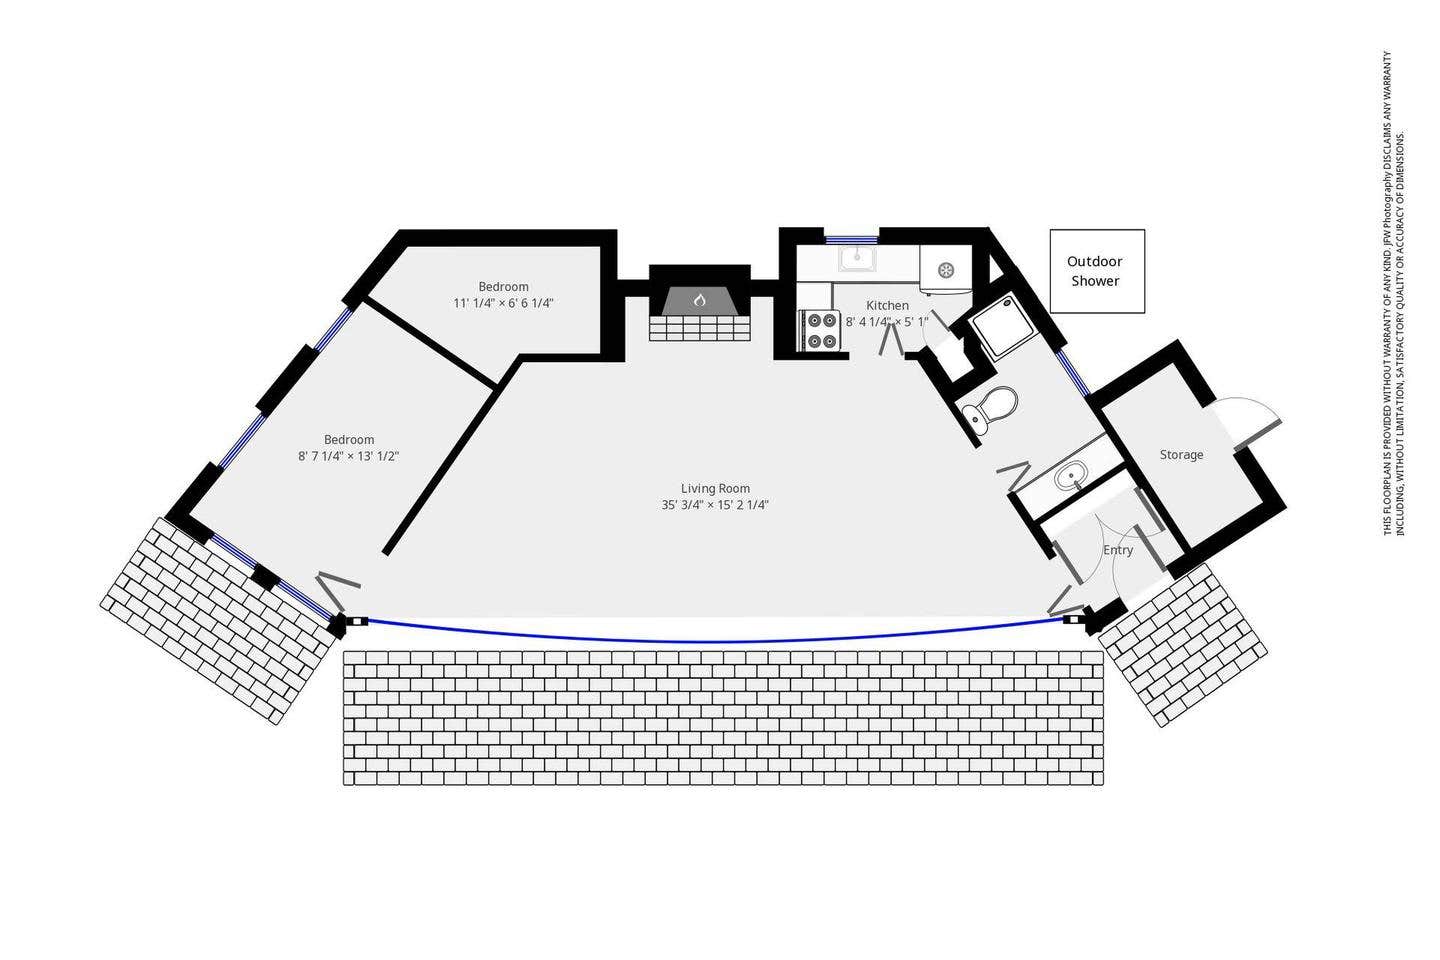 A floor plan of this truly unique house



Credit: NPS